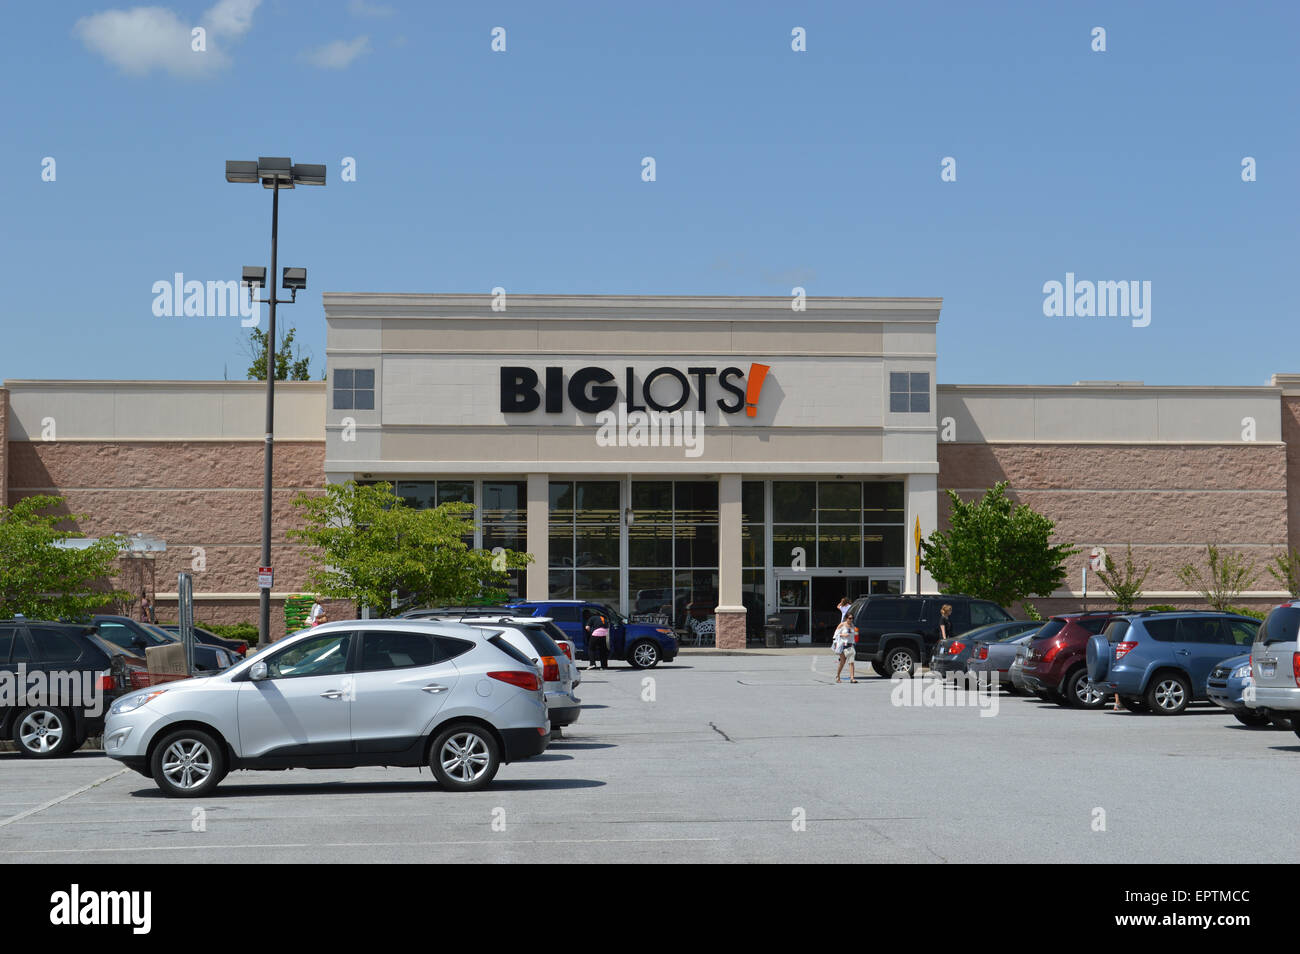 A Big Lots discount store. Stock Photo